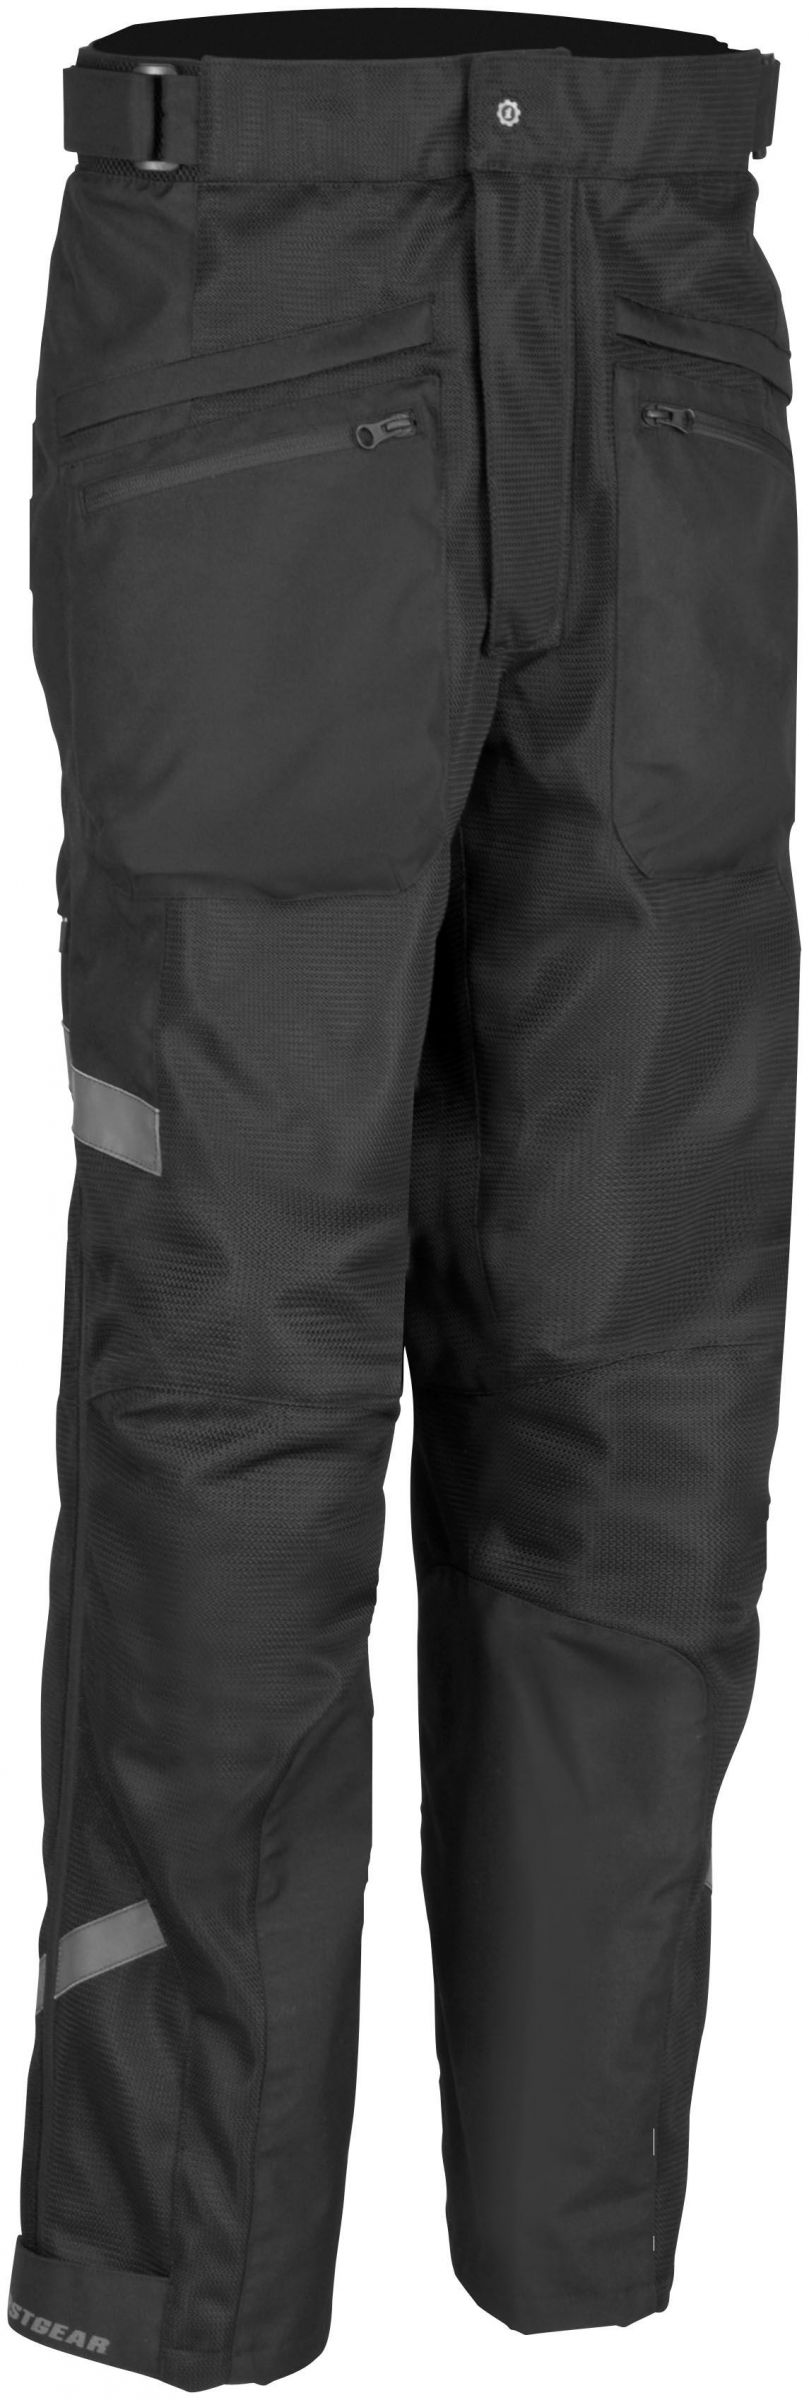 4L60-FIRST-FTP-1105-01-M032 HT Air Overpants